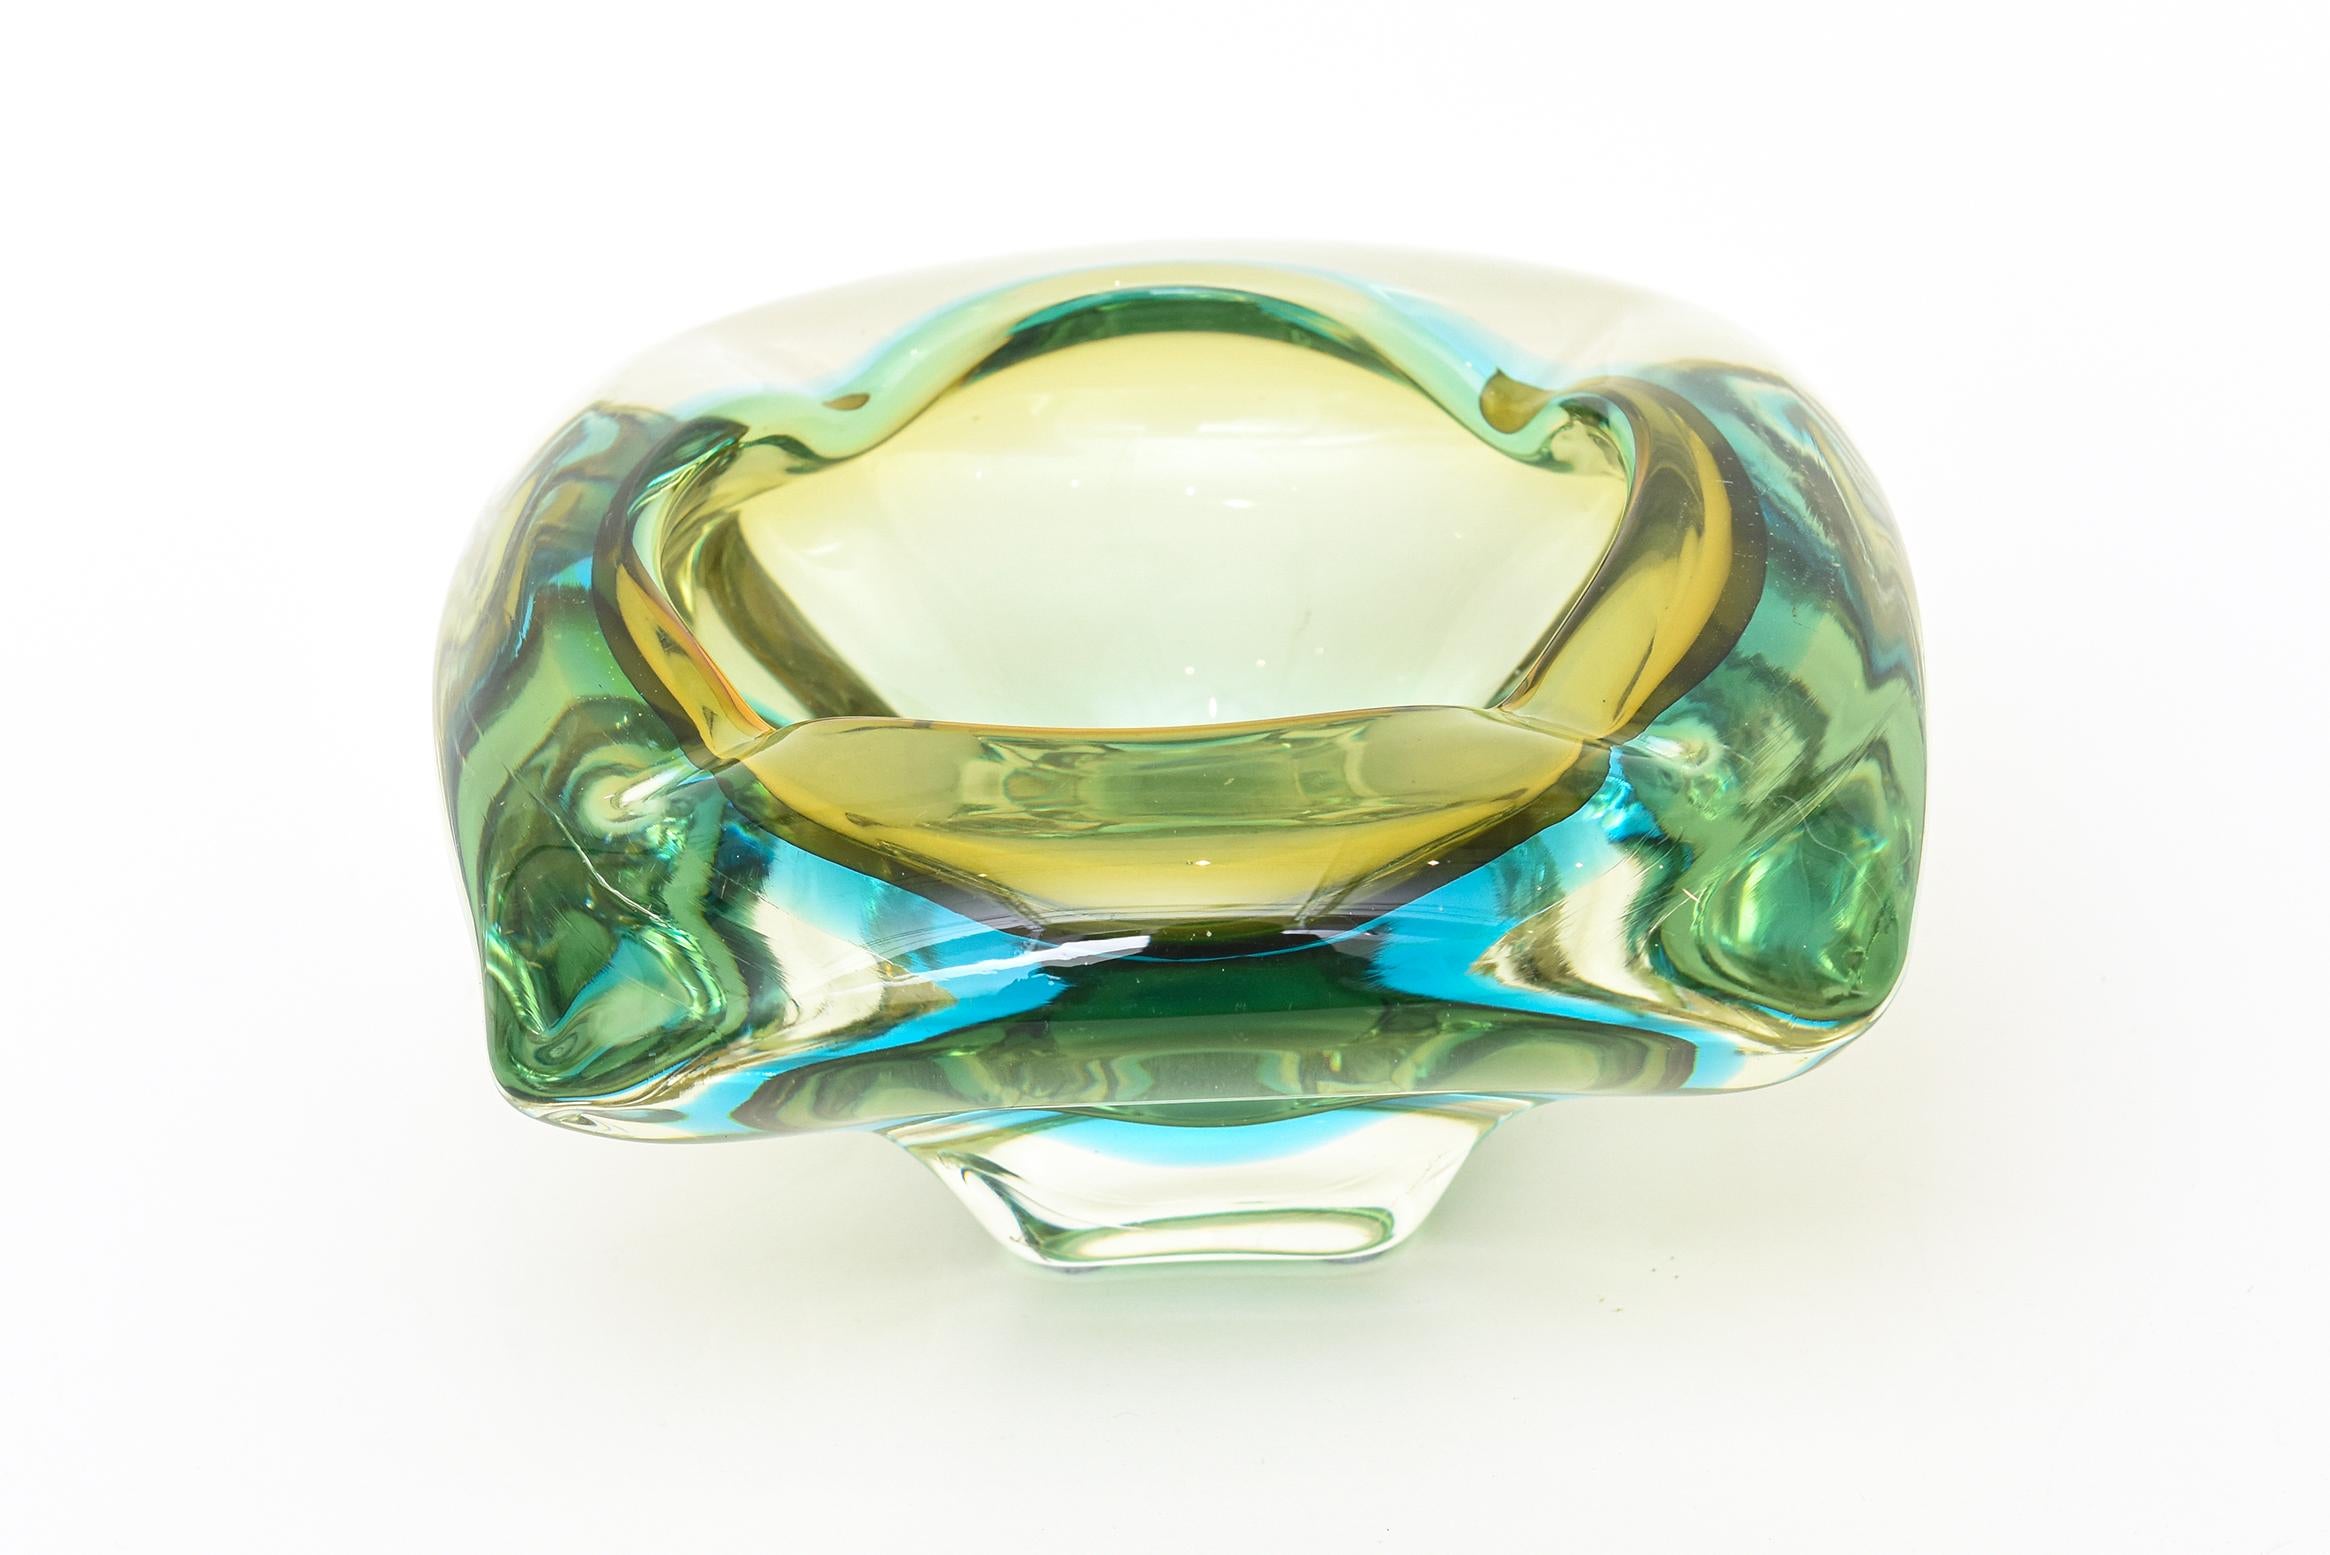 Flavio Poli Vintage Murano Sommerso Turquoise and Green Glass Bowl Or Ashtray For Sale 2